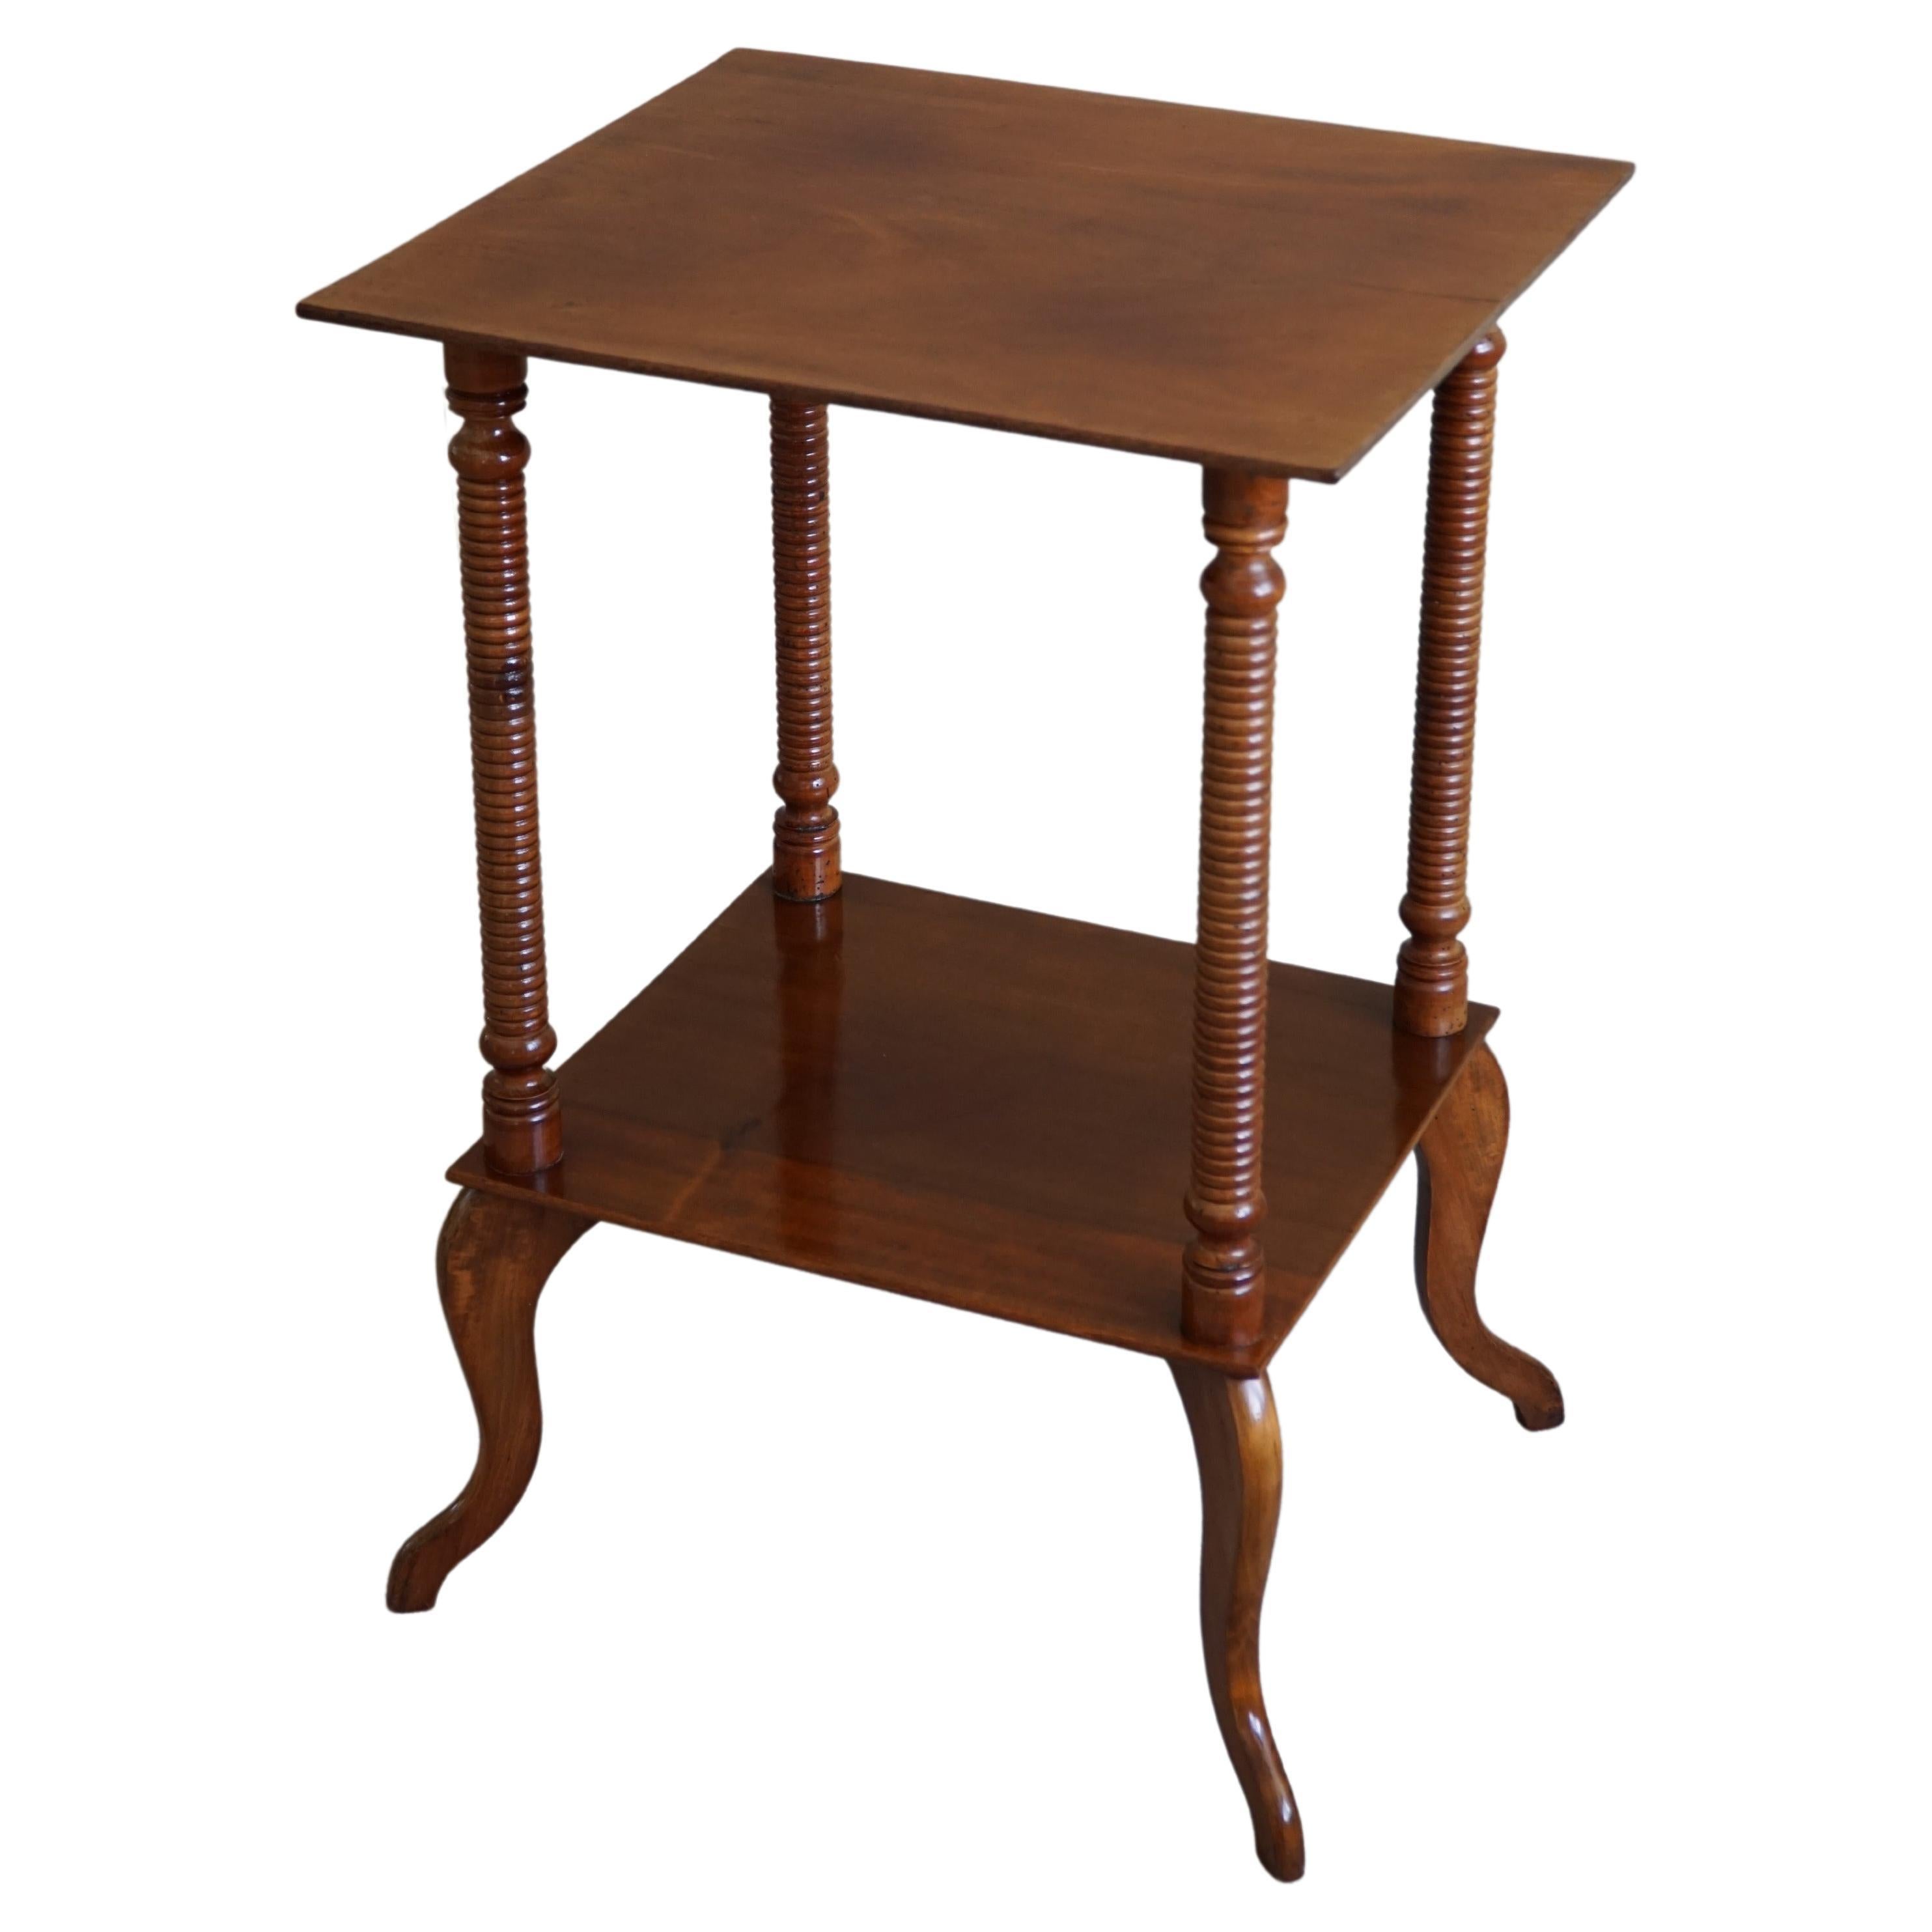 Danish Side Table / Pedestal with Finely Carved Legs, Early 20th Century